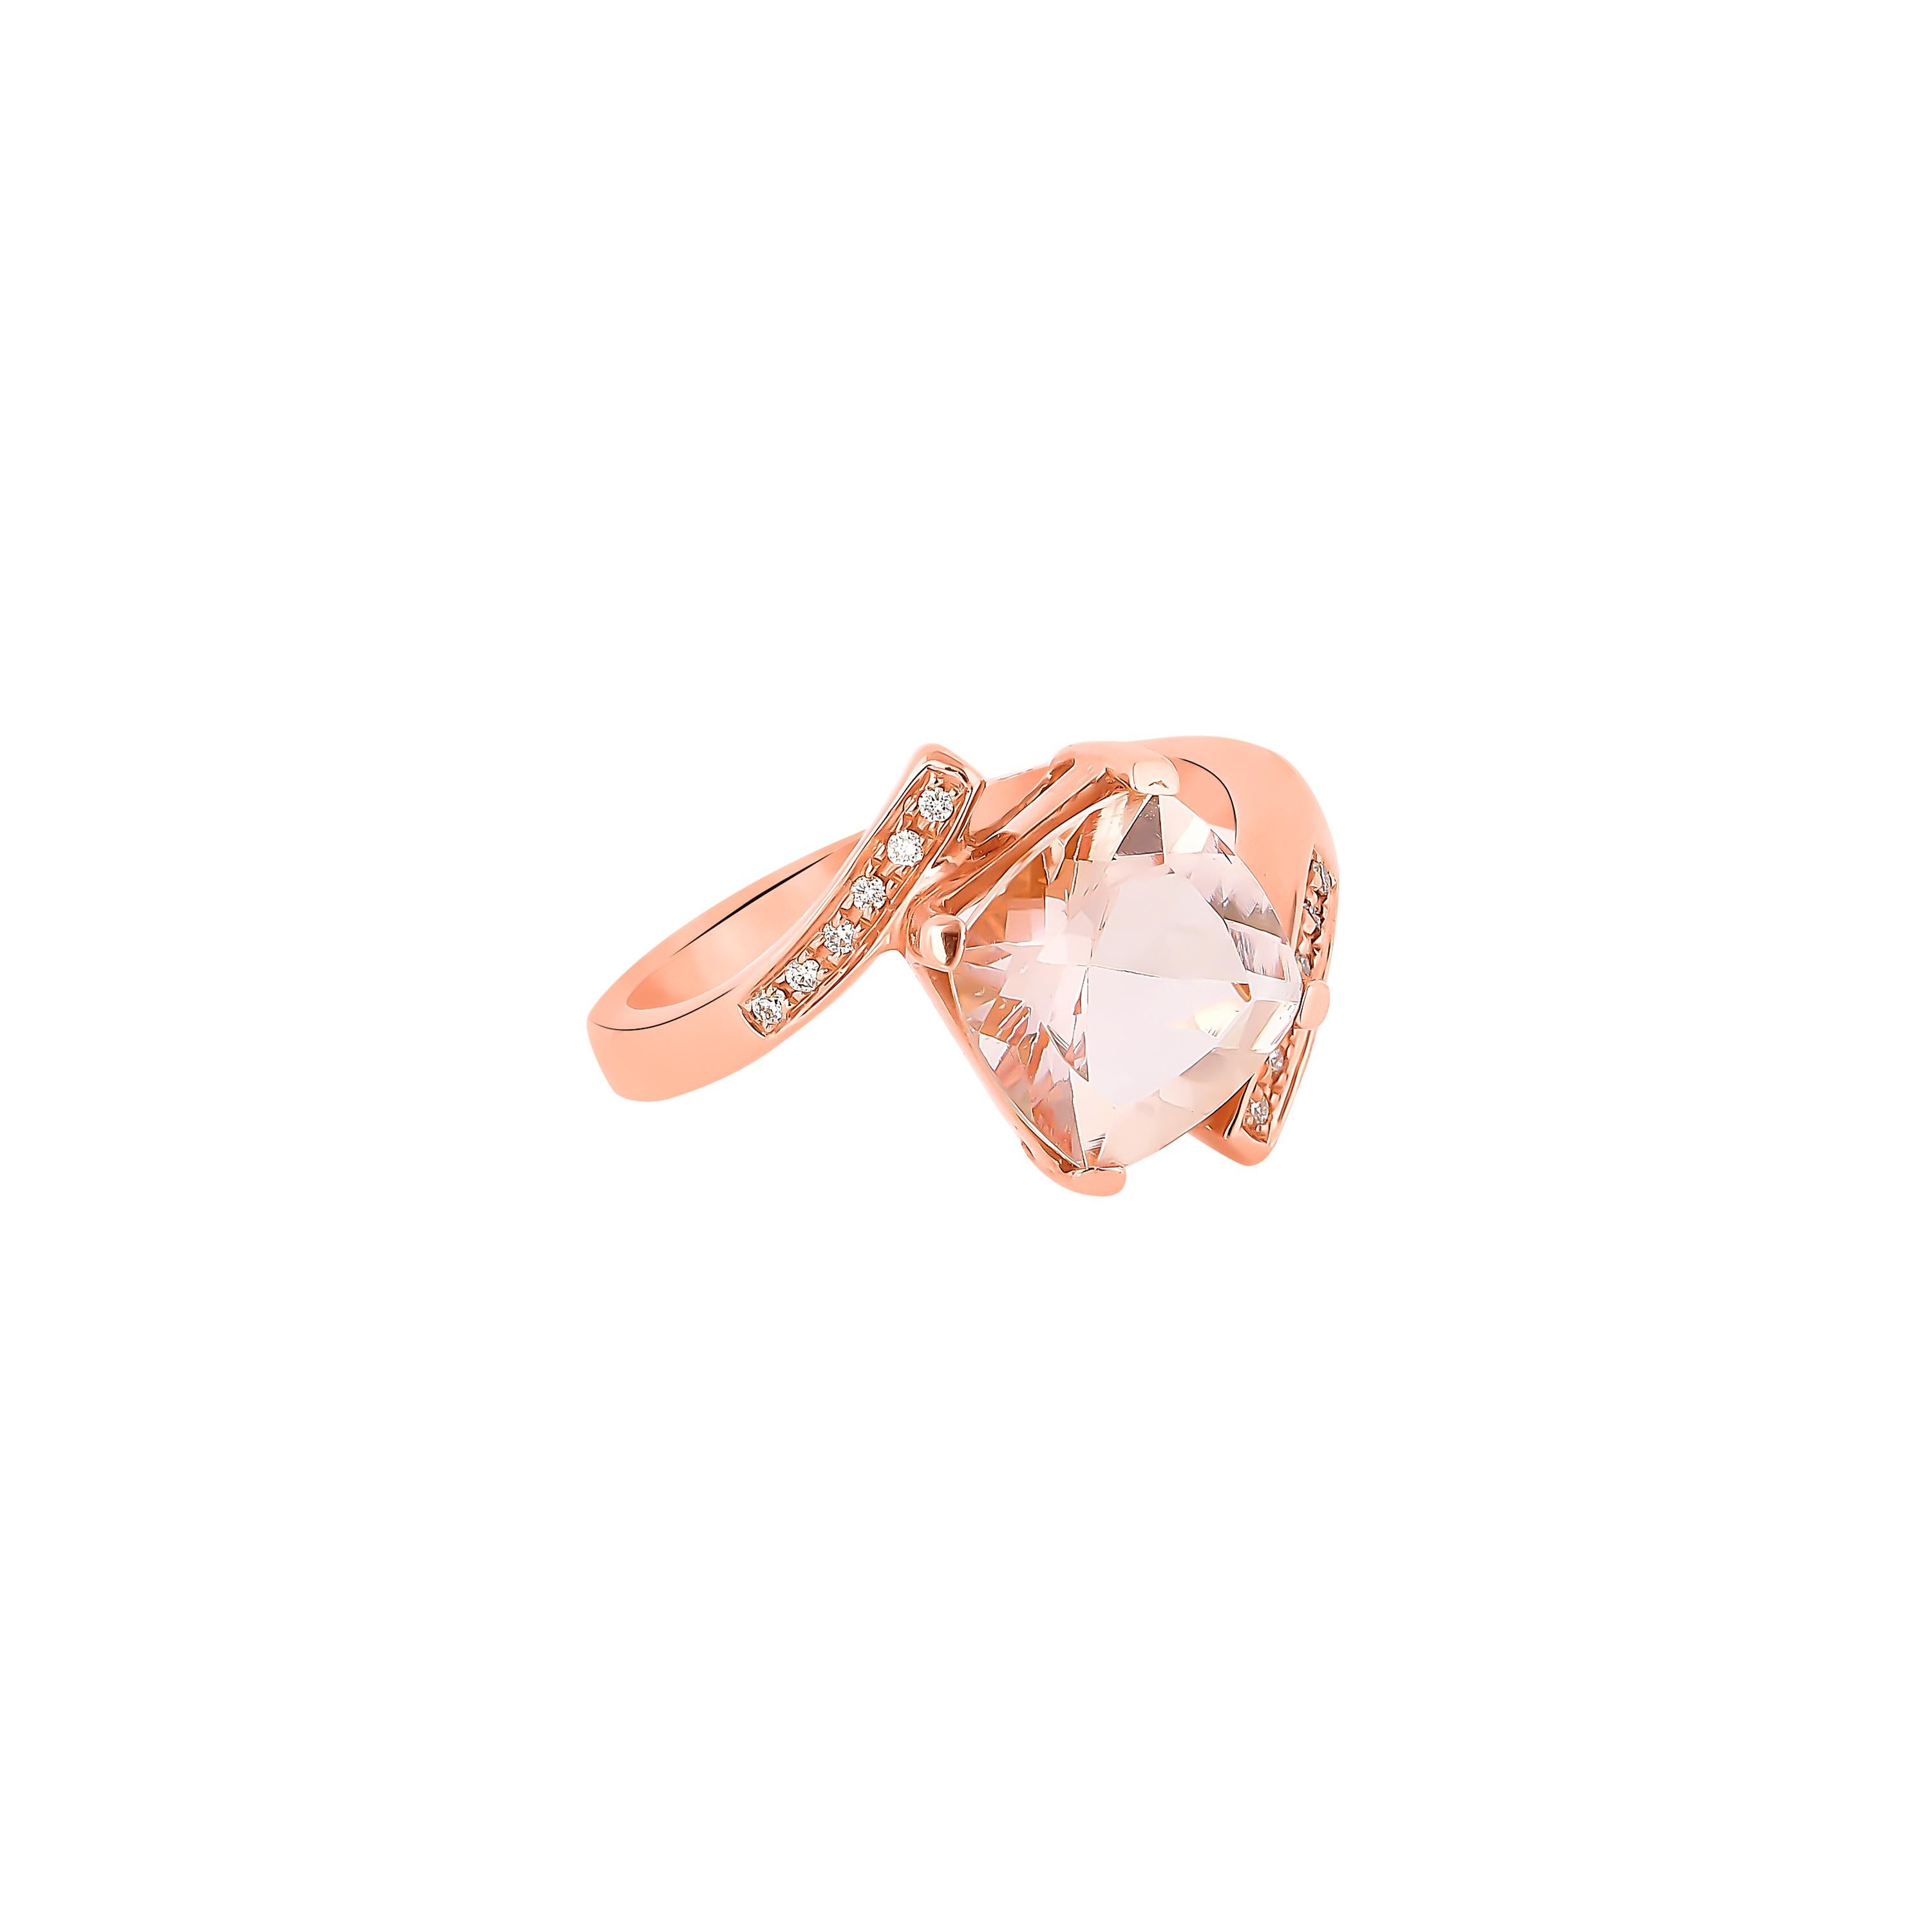 This collection features an array of magnificent morganites! Accented with diamonds these rings are made in rose gold and present a classic yet elegant look. 

Classic morganite ring in 18K rose gold with diamonds. 

Morganite: 2.73 carat cushion